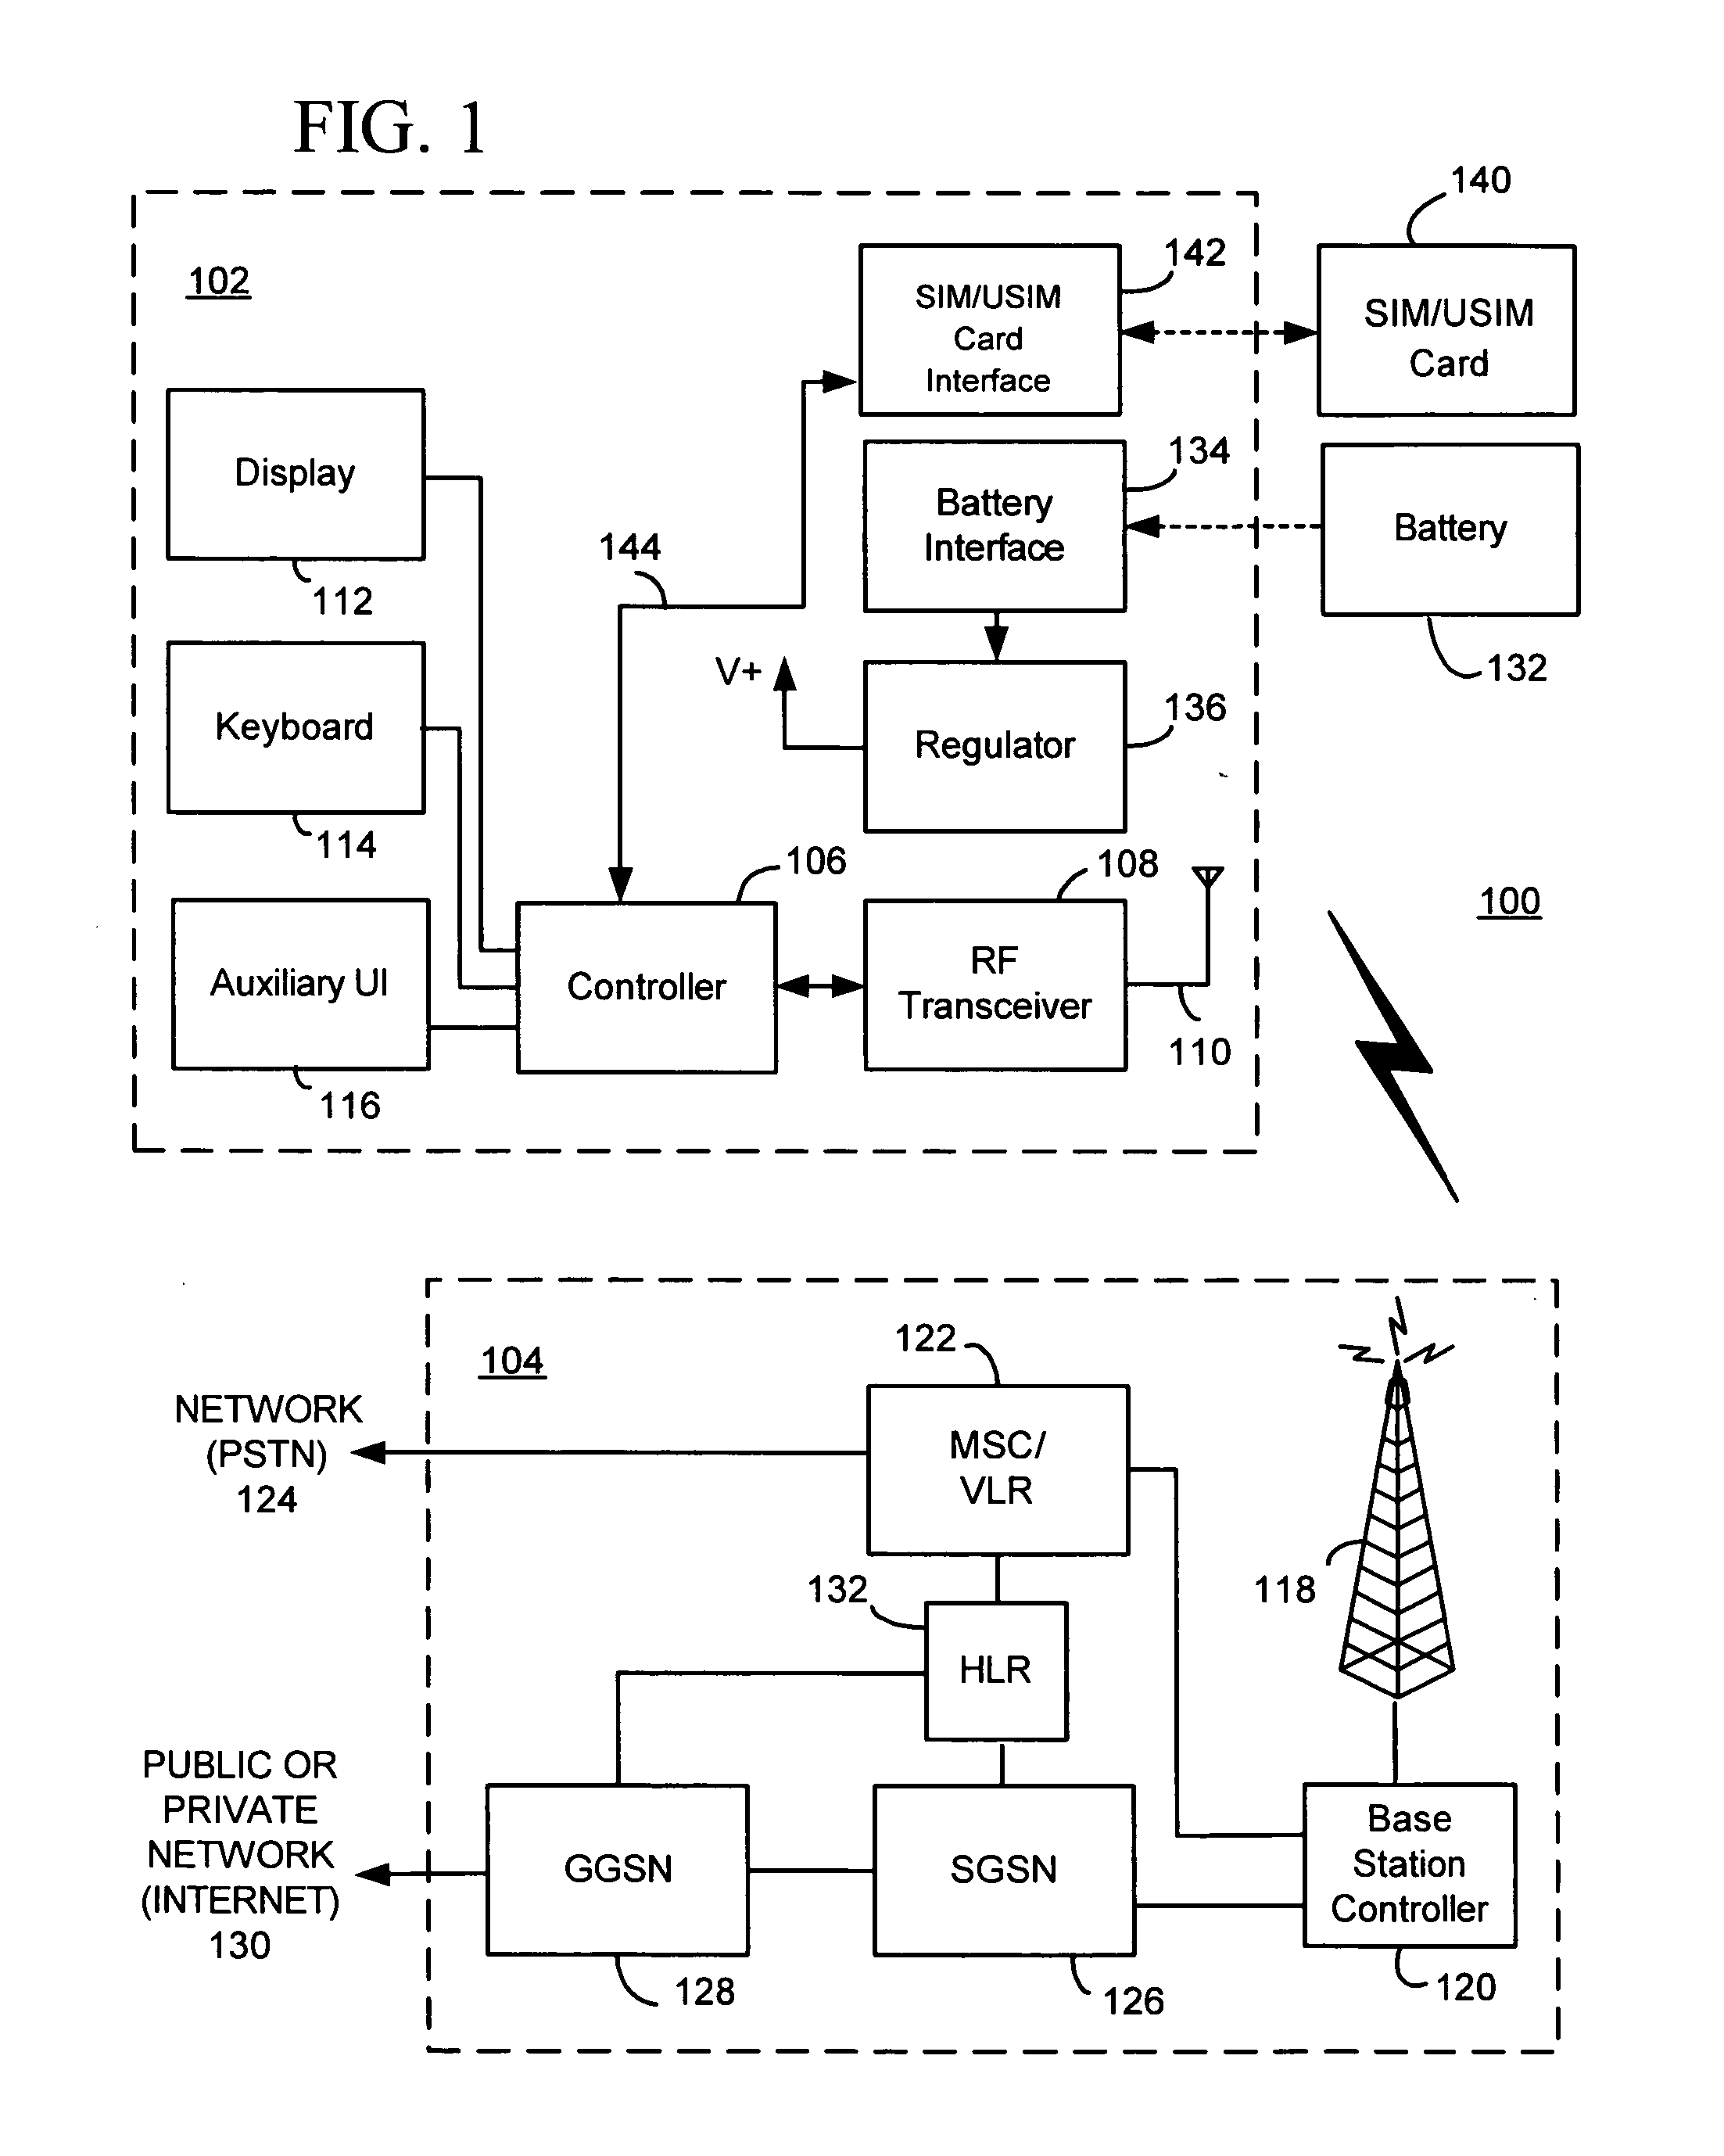 Methods and apparatus for producing a user-controlled PLMN list for a SIM/USIM card with use of a user agent application